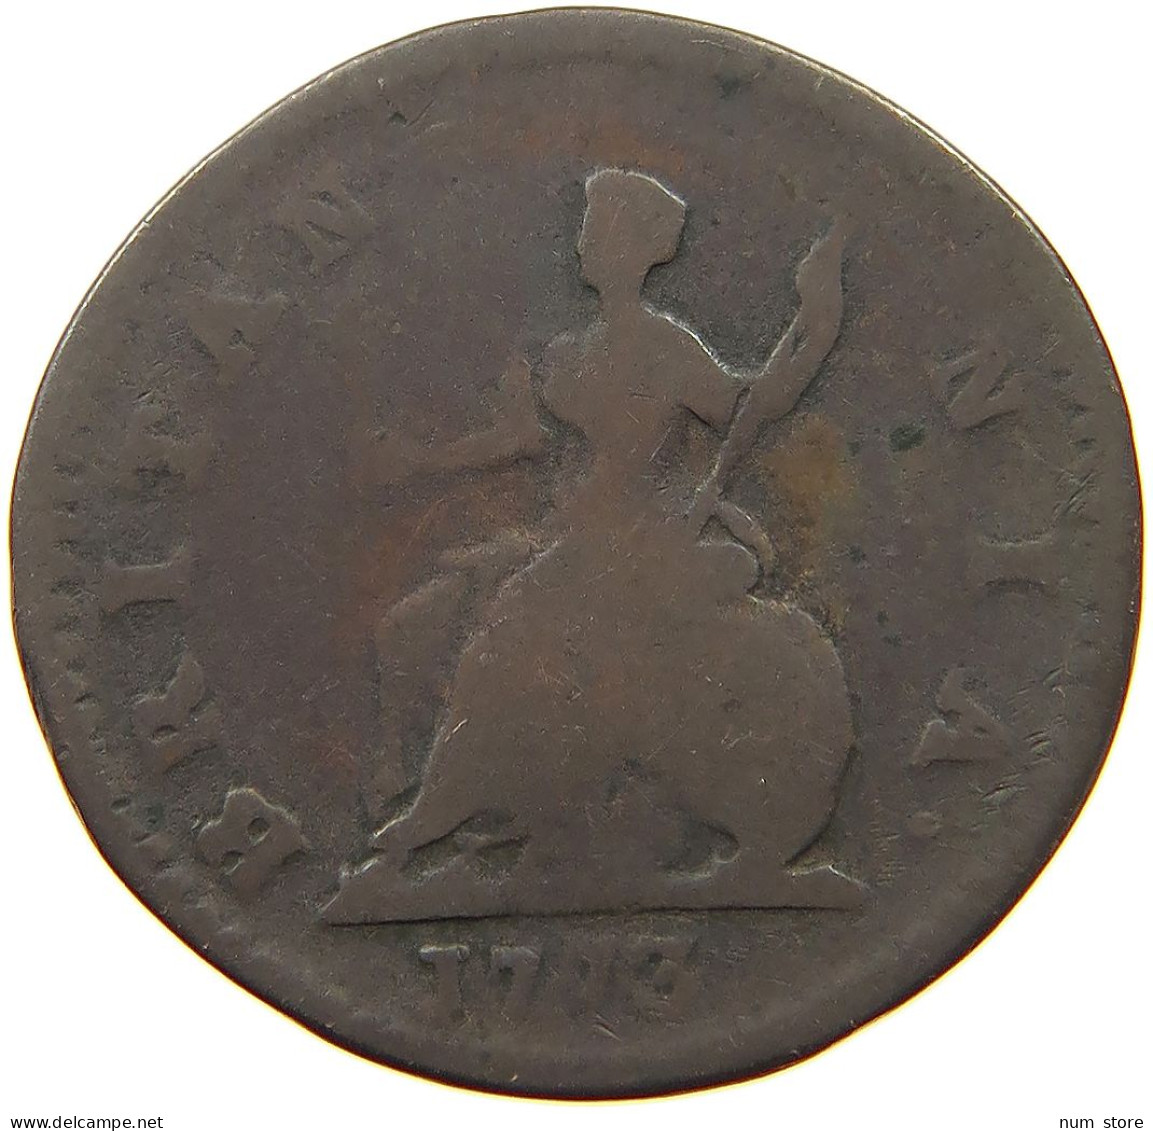 GREAT BRITAIN FARTHING 1773 GEORGE III. 1760-1820 #s036 0489 - A. 1 Farthing